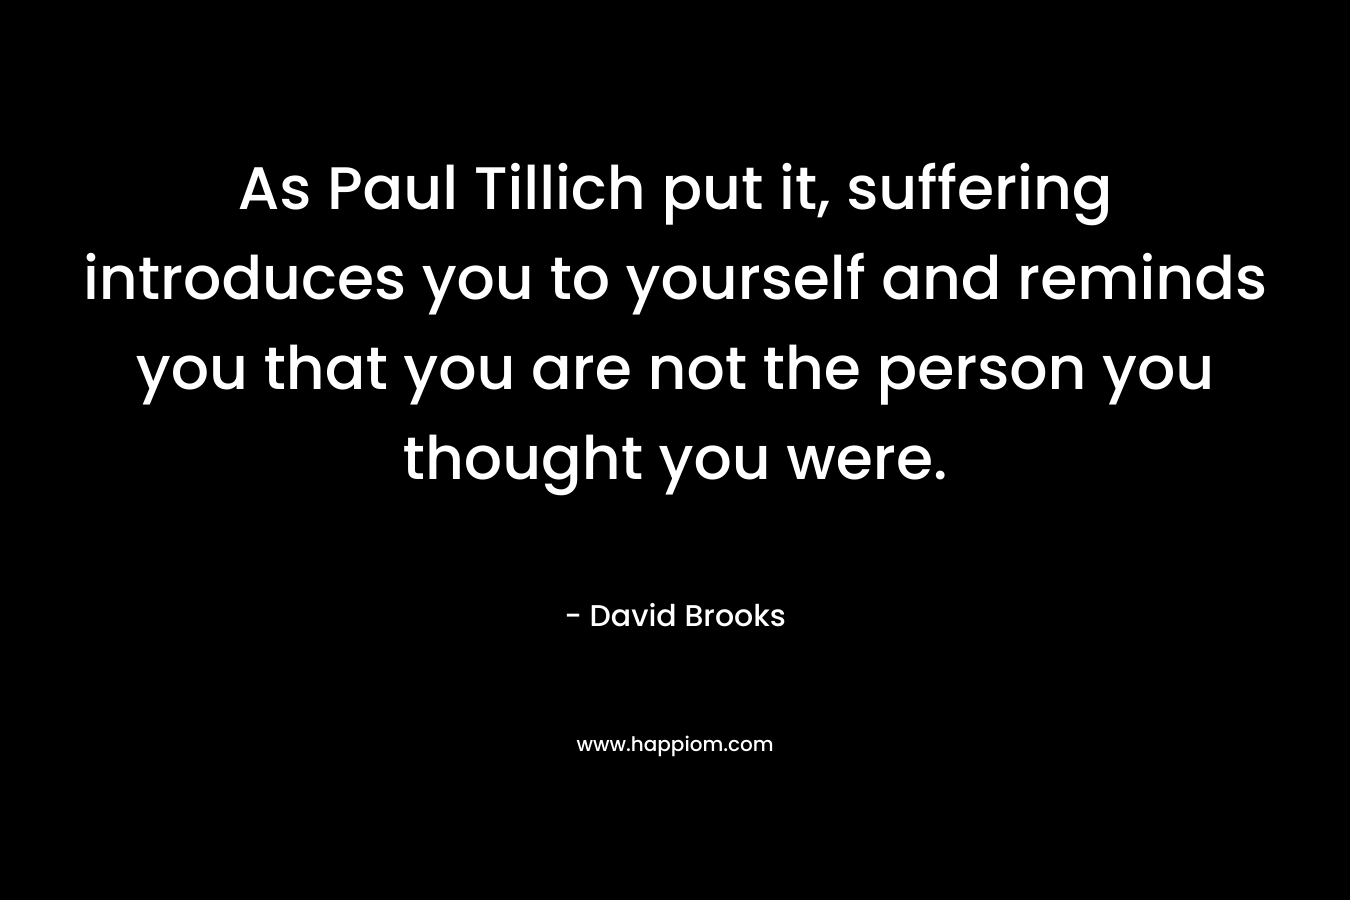 As Paul Tillich put it, suffering introduces you to yourself and reminds you that you are not the person you thought you were. – David Brooks